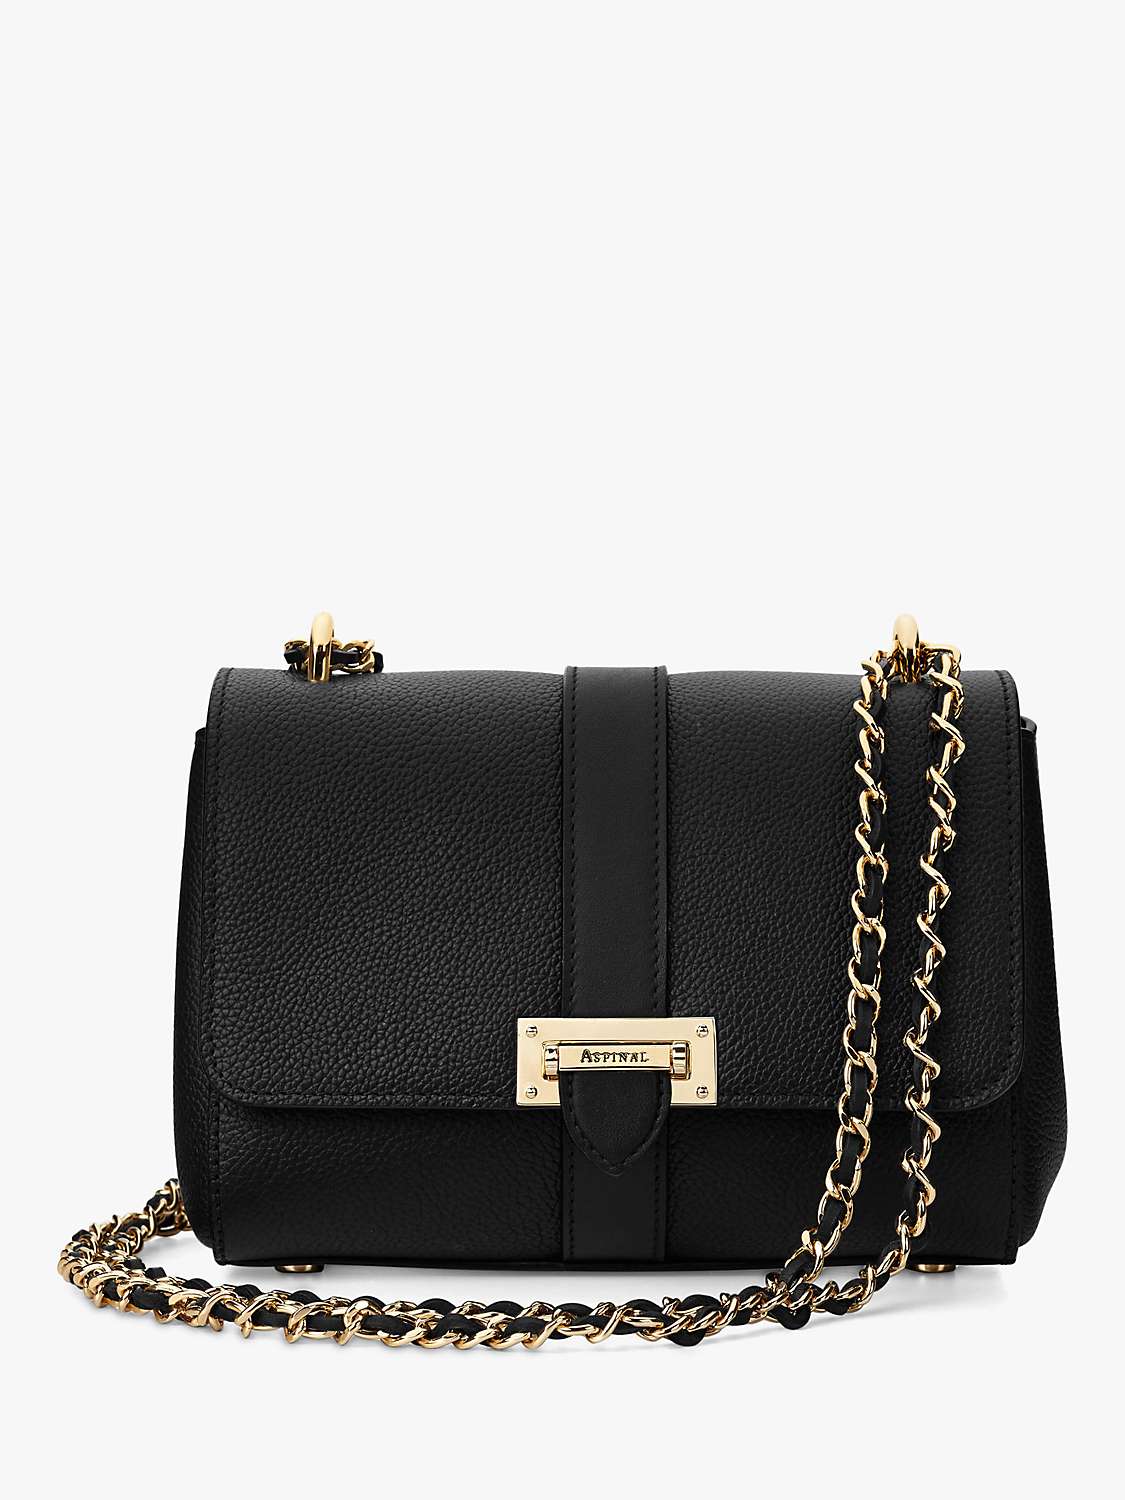 Buy Aspinal of London Lottie Small Pebble Leather Shoulder Bag Online at johnlewis.com